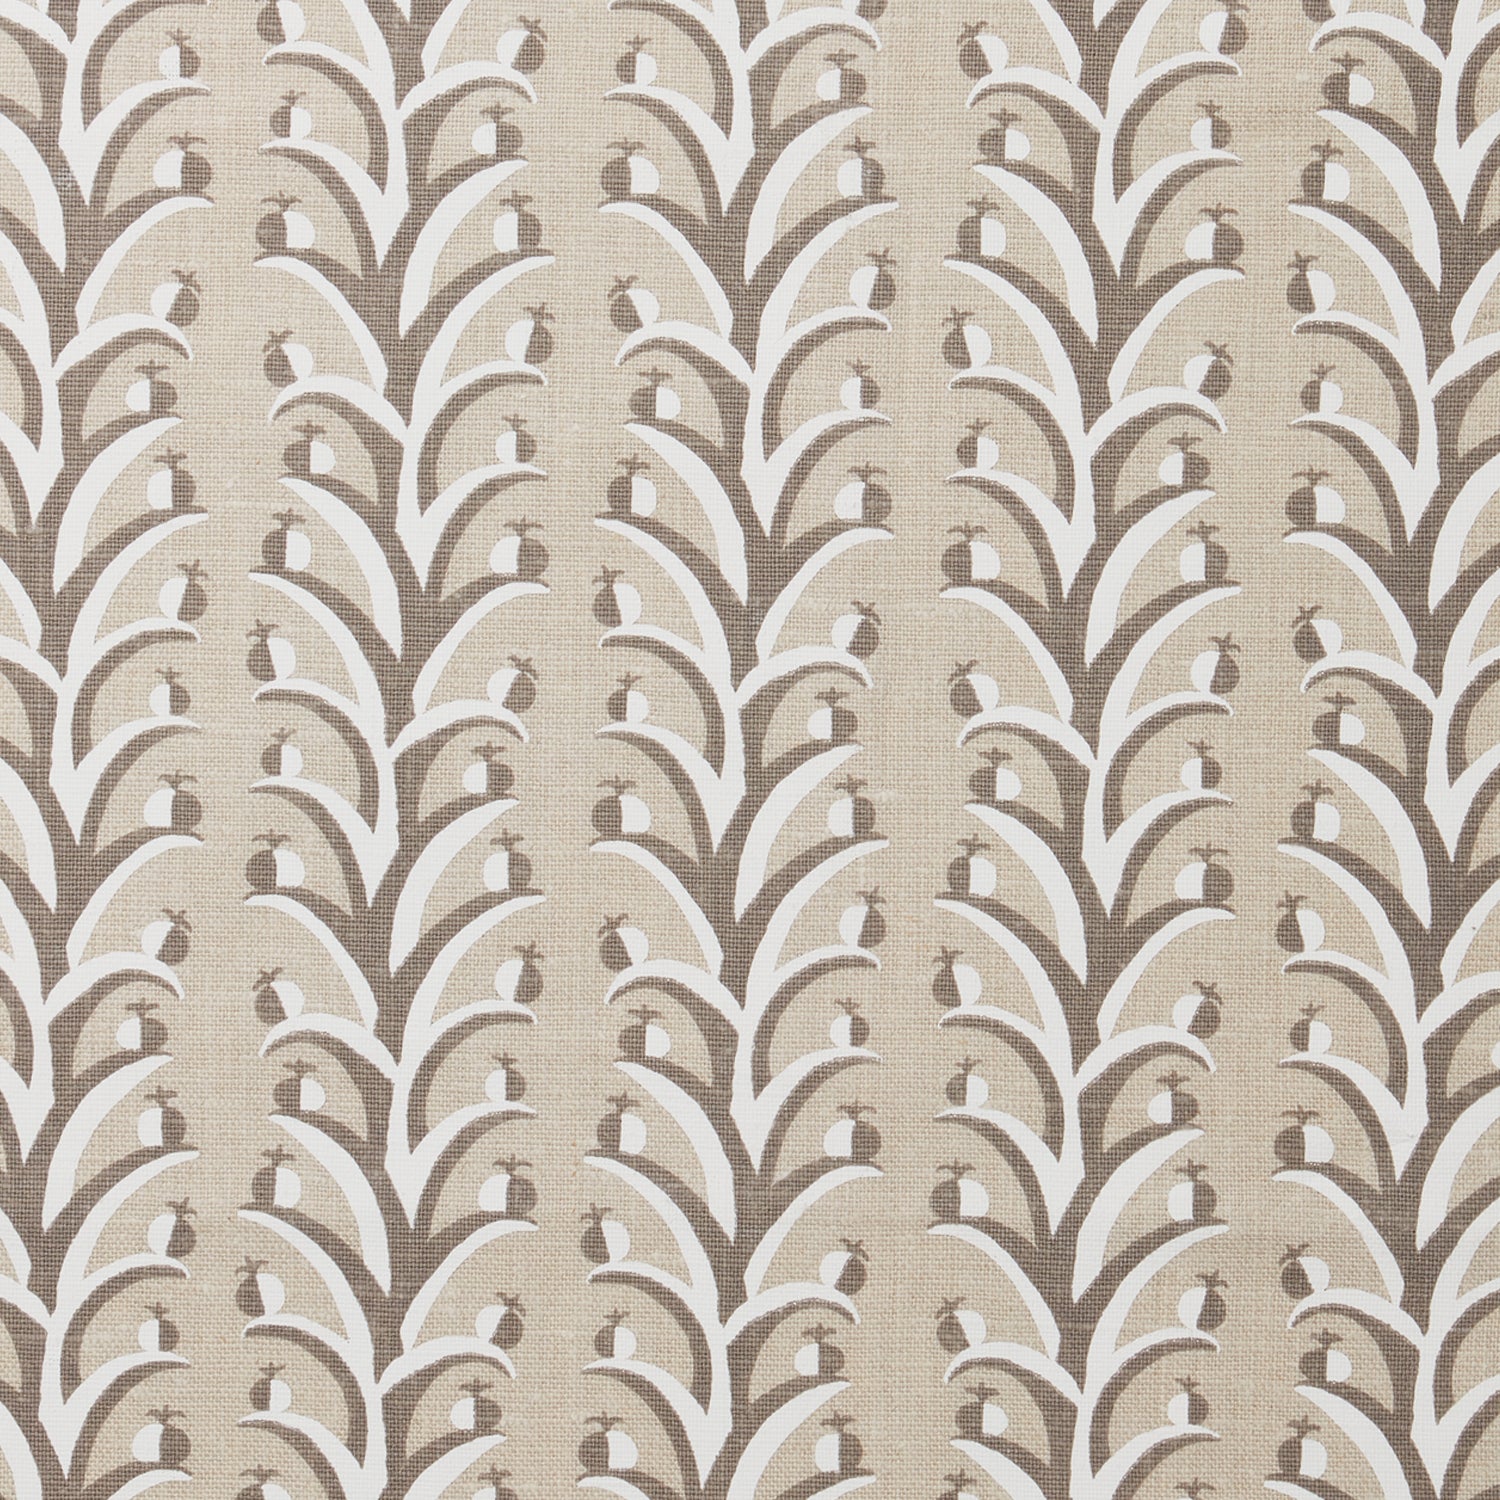 Fabric swatch with a horizontal striped pattern of curved branches topped with tiny fruits, in shades of tan, taupe and white.